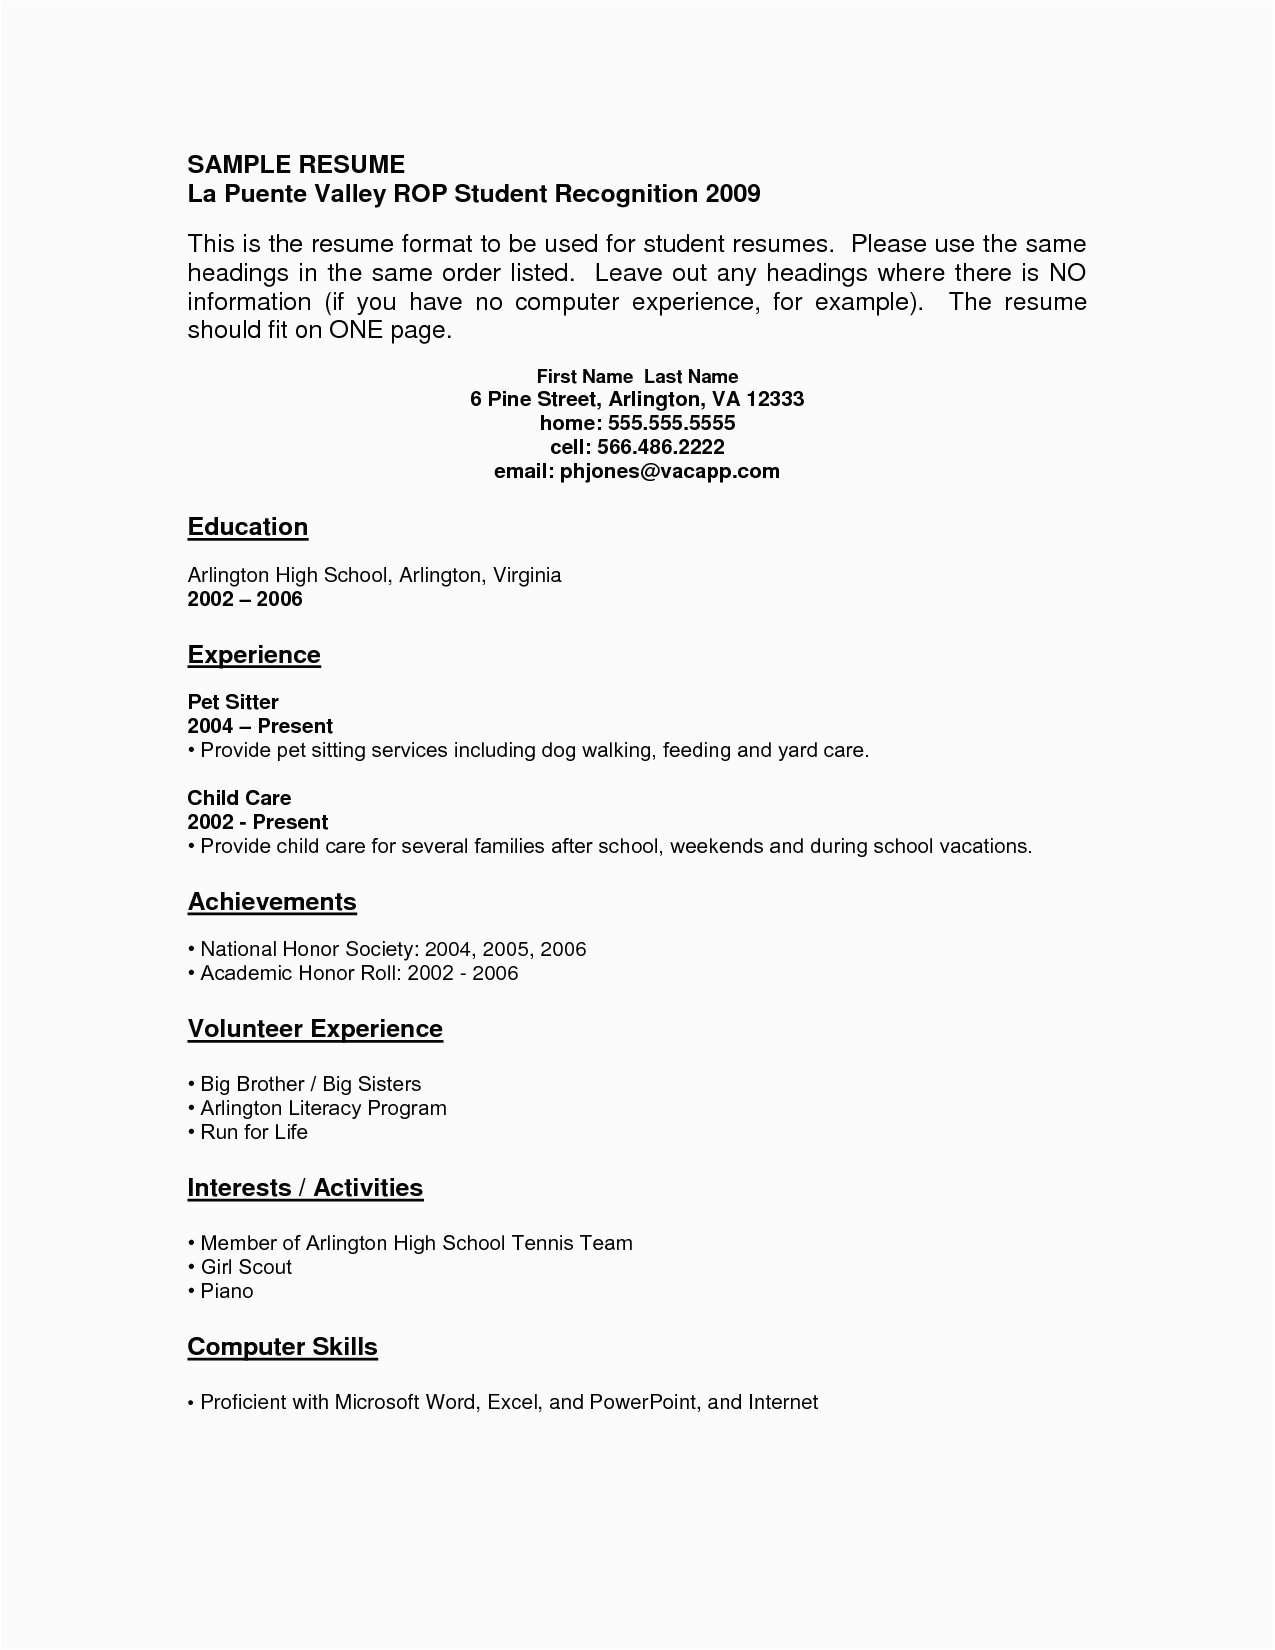 free resume templates for high school students with no experience